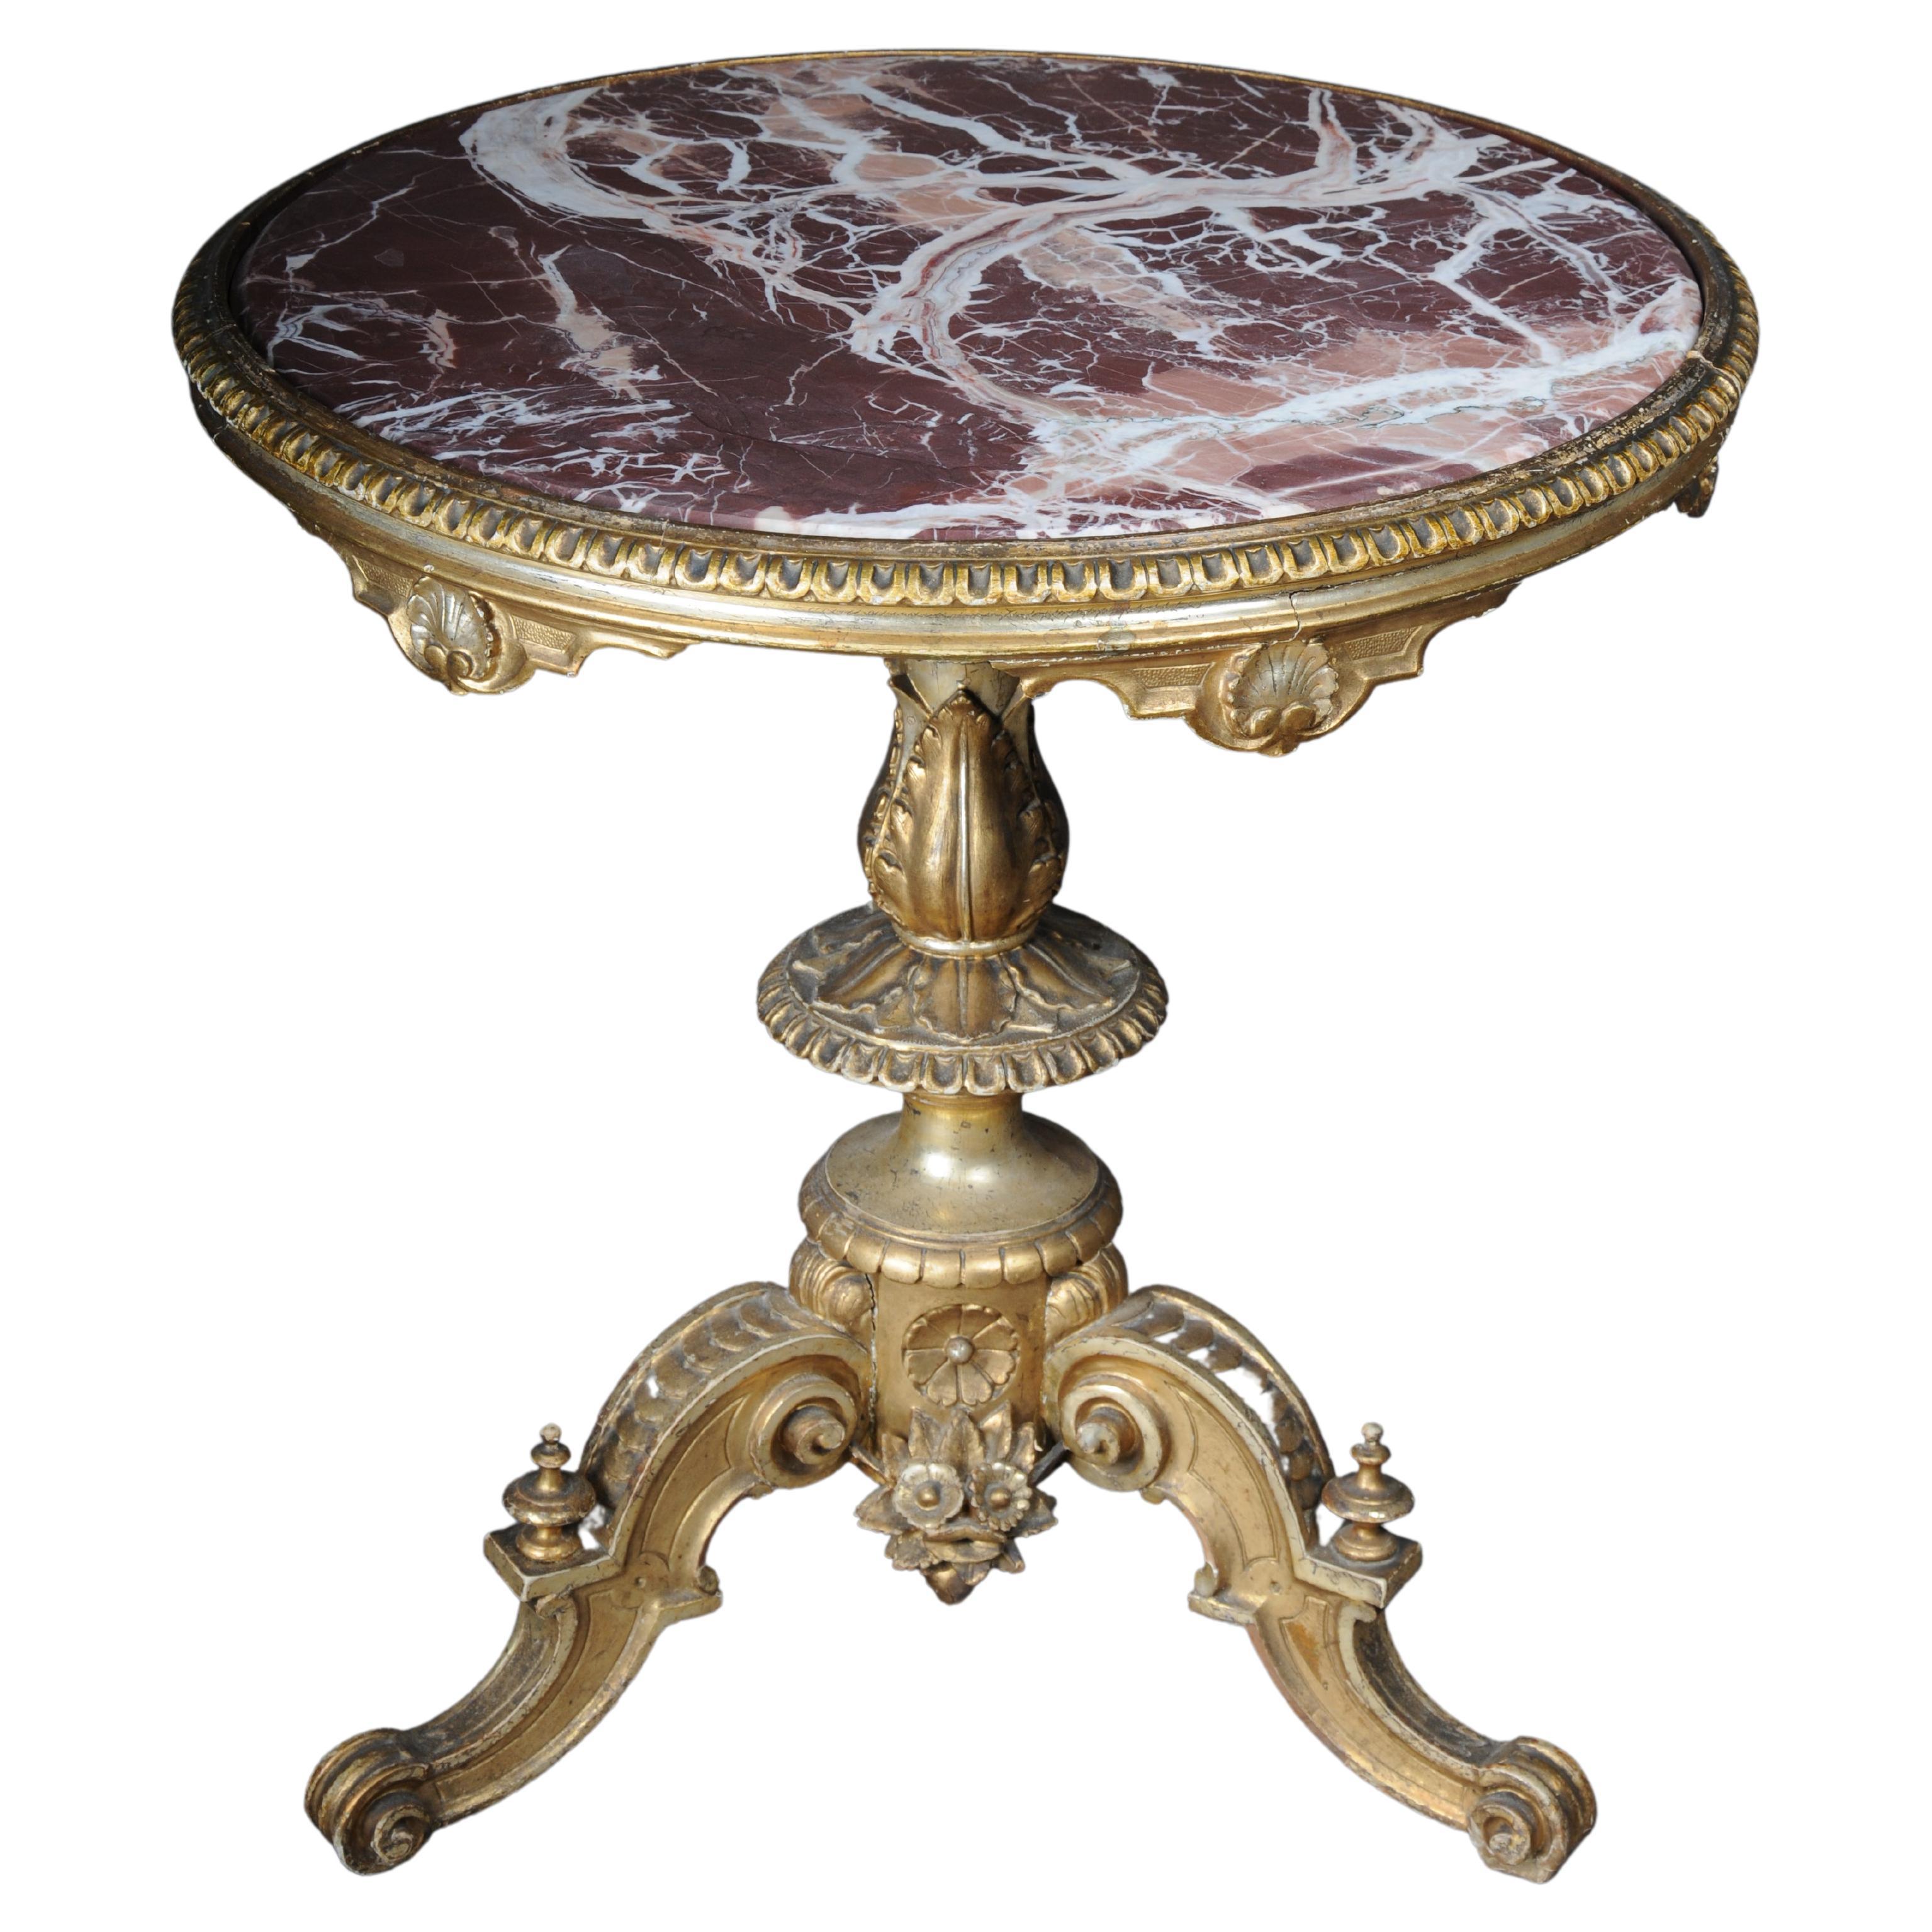 Magnificent antique side table gilded with marble top from around 1860 For Sale